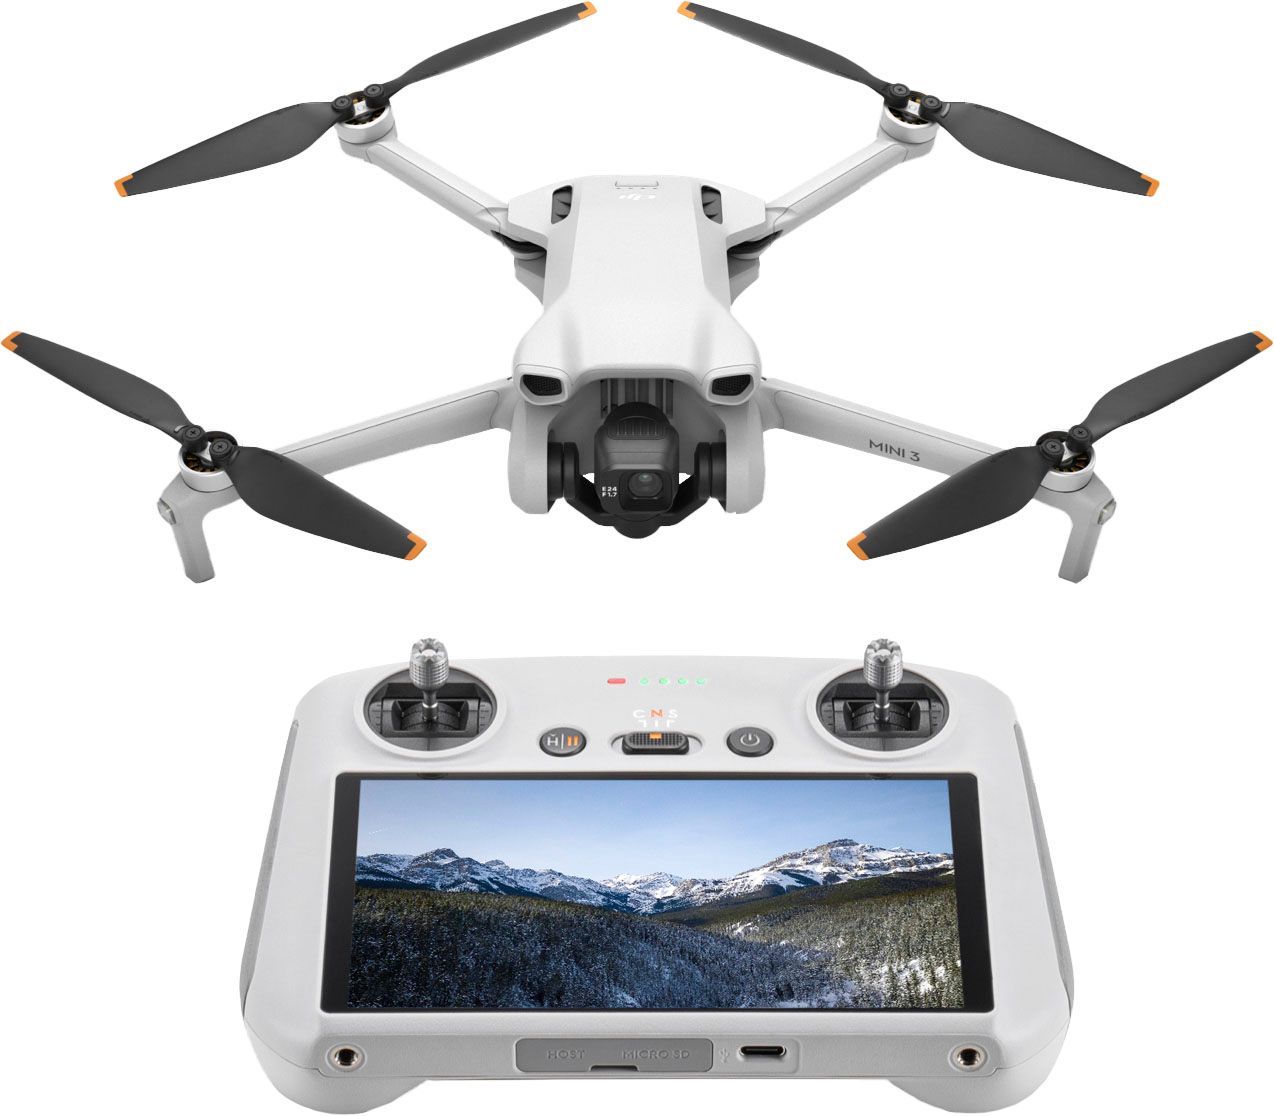 DJI Mini 3 and Remote Control with Built-in Screen